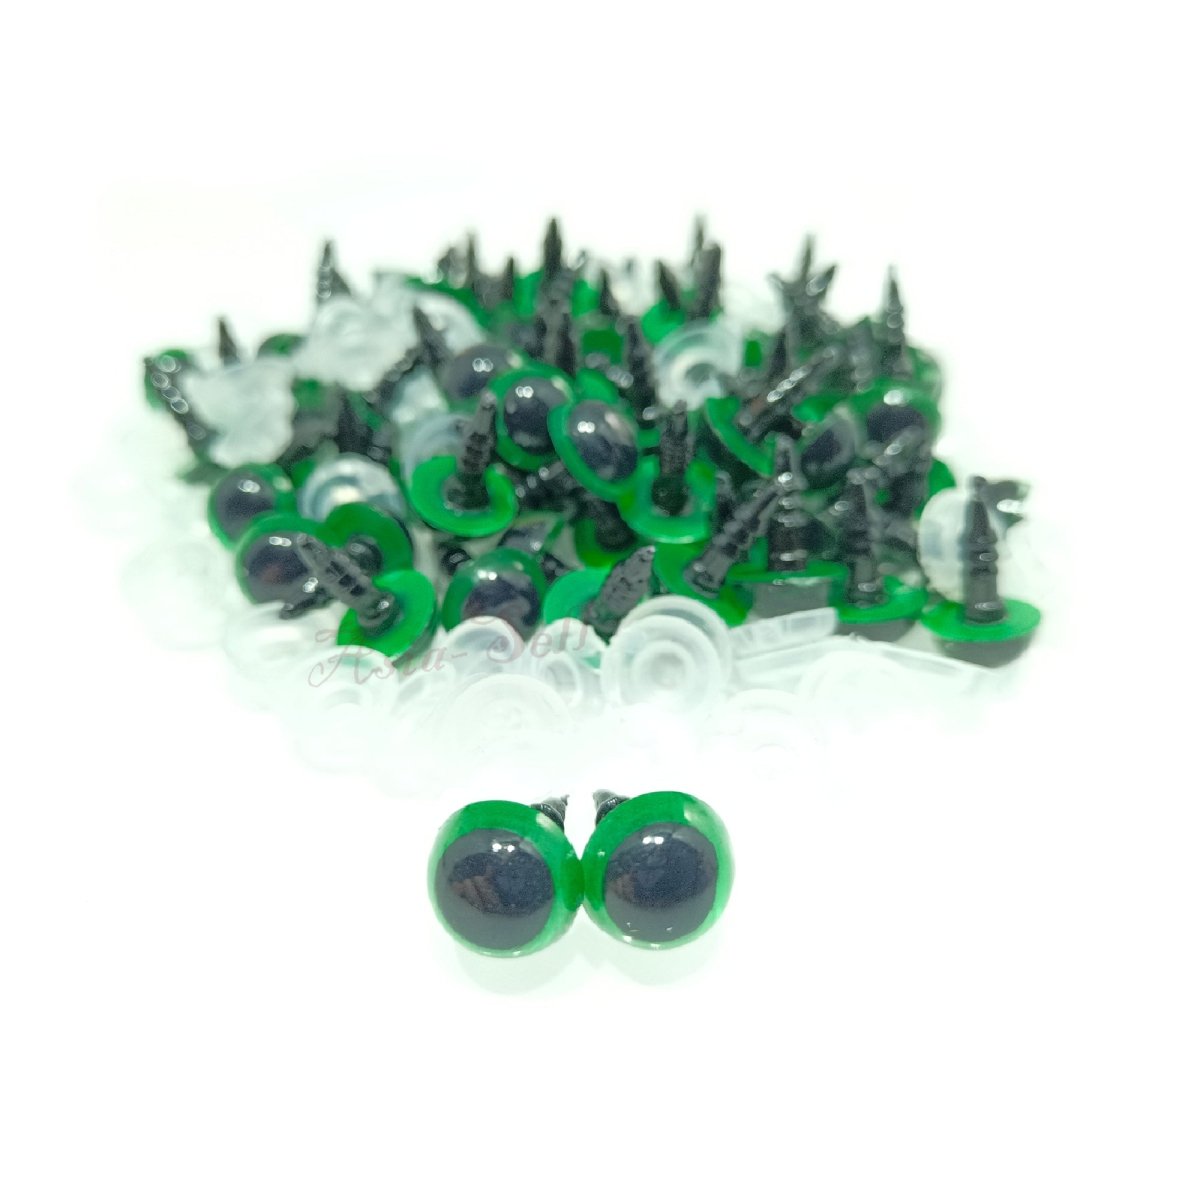 20pcs 10mm Colour Safety Eyes For Teddy Bear Doll Animal Puppet Crafts Plastic Eyes - Green - - Asia Sell